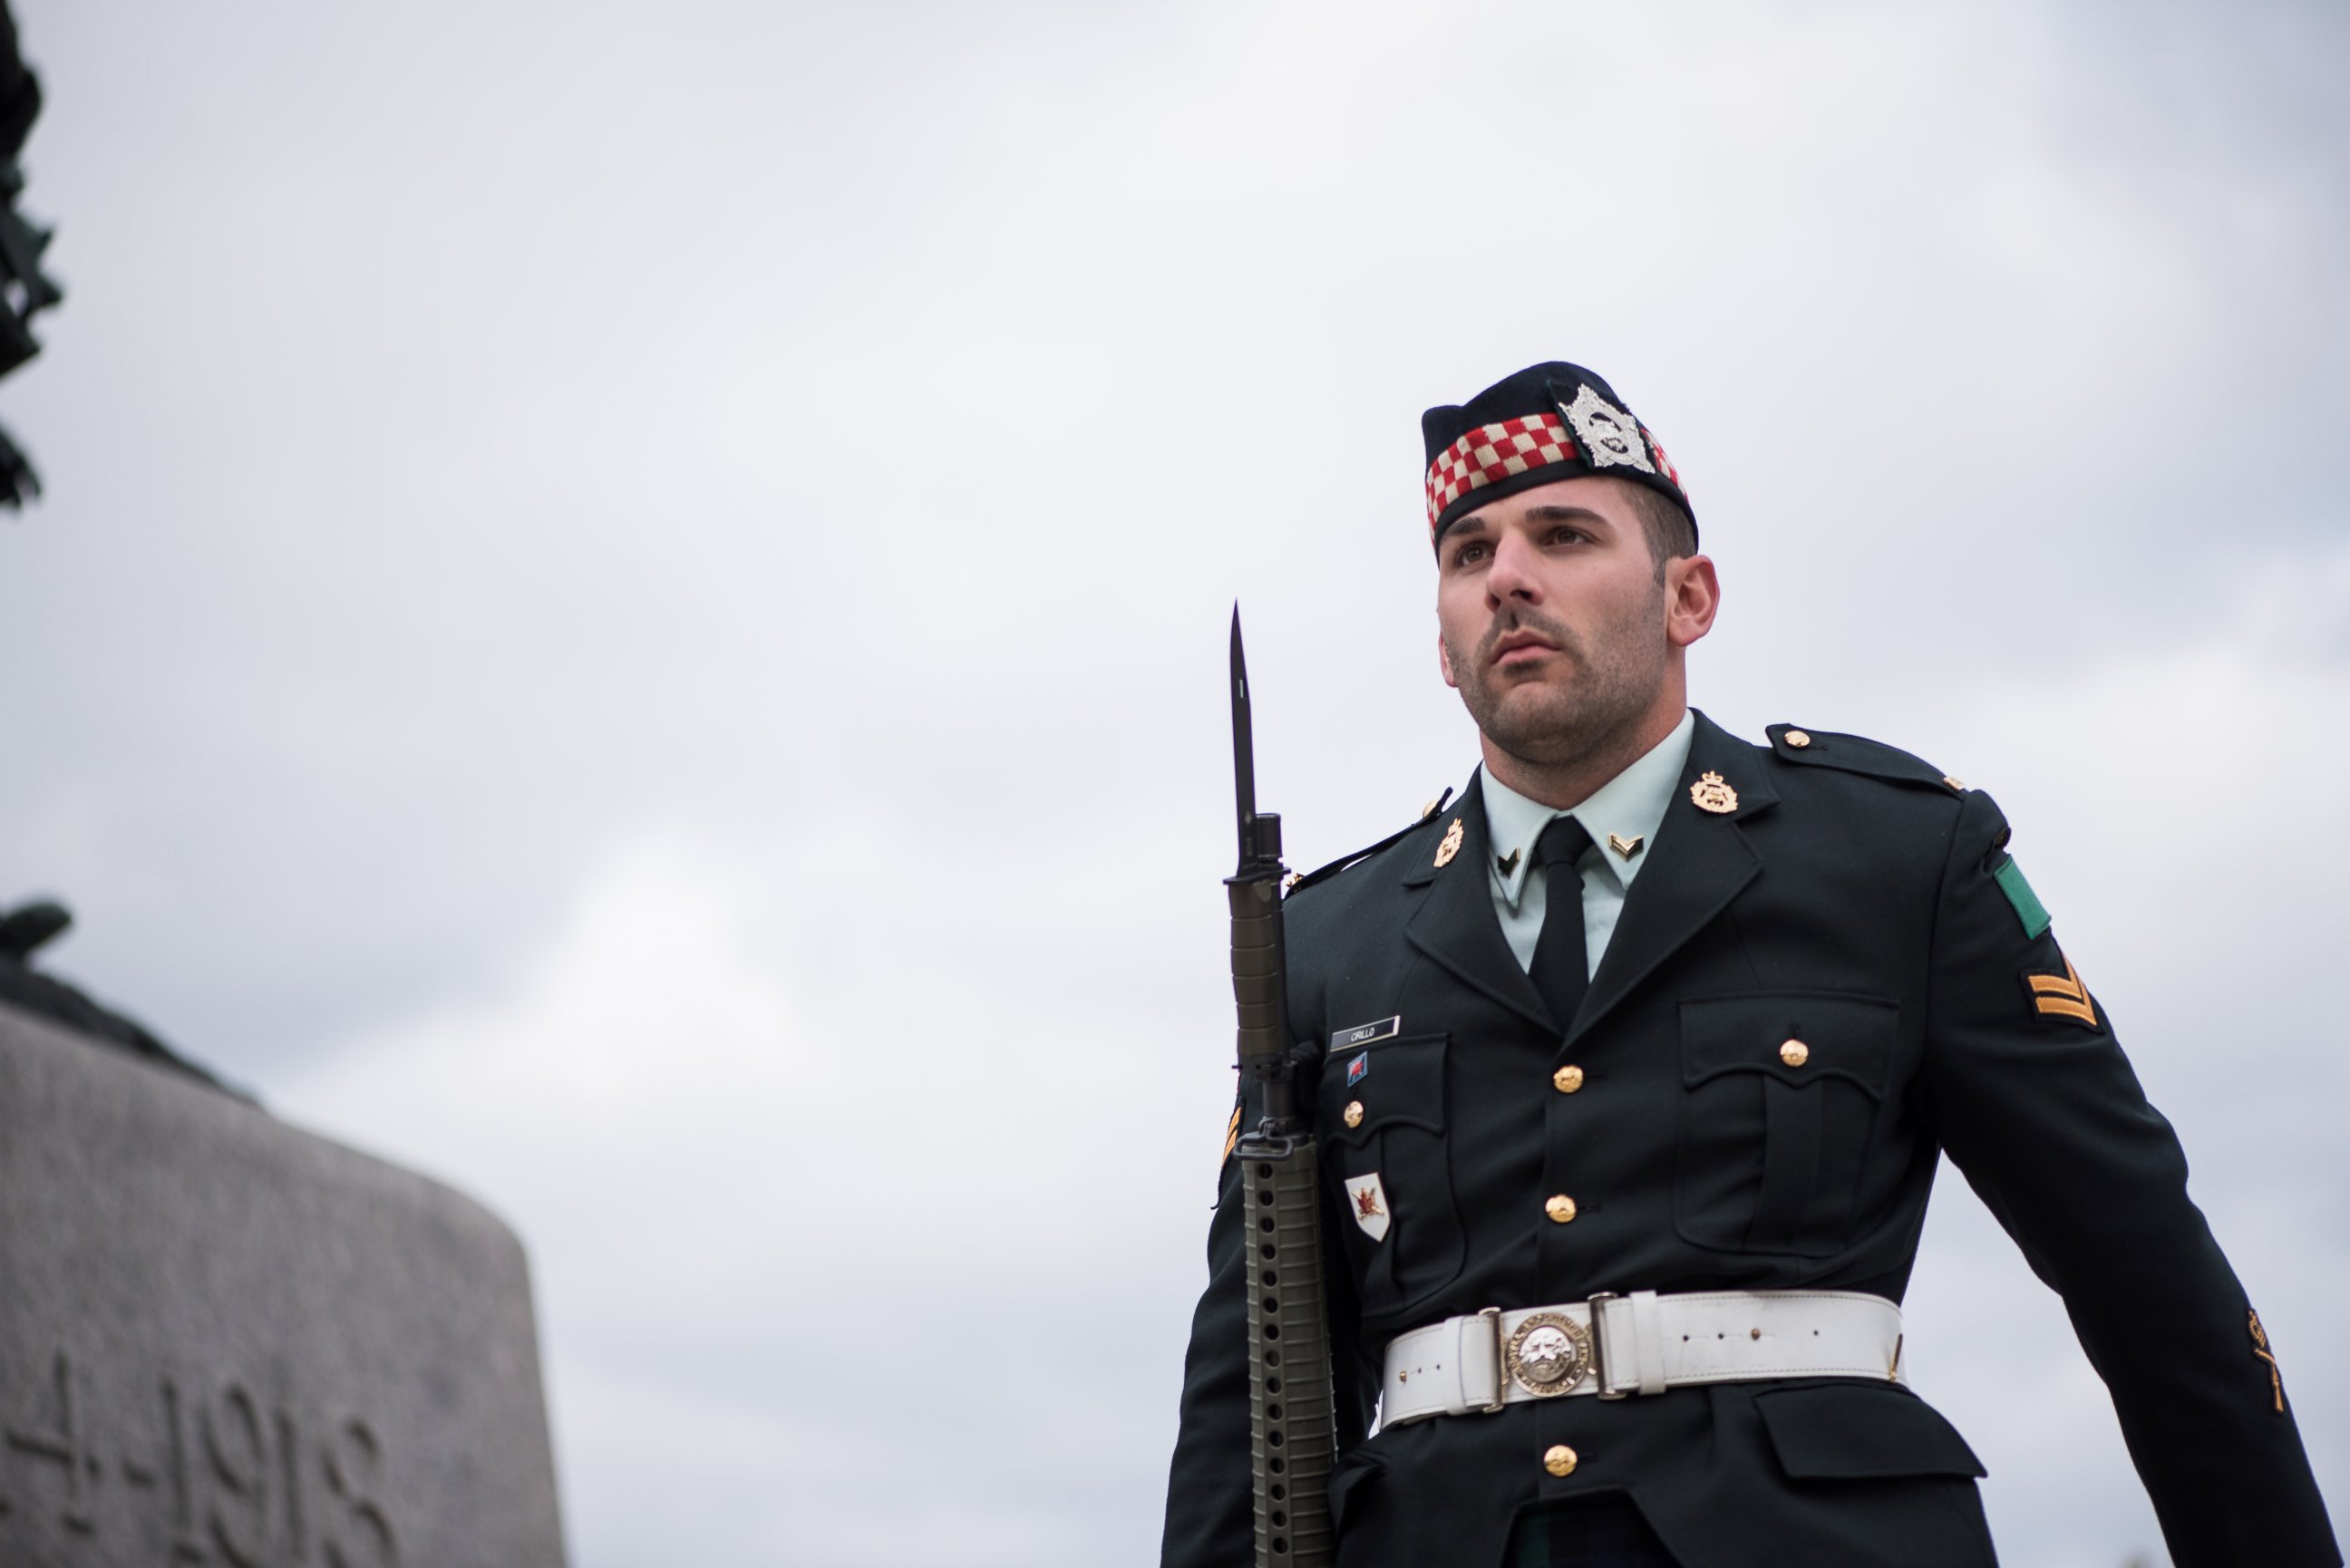 Cpl. Nathan Cirillo, 24, is seen at the National War Memorial in Ottawa, Oct. 19, 2014.